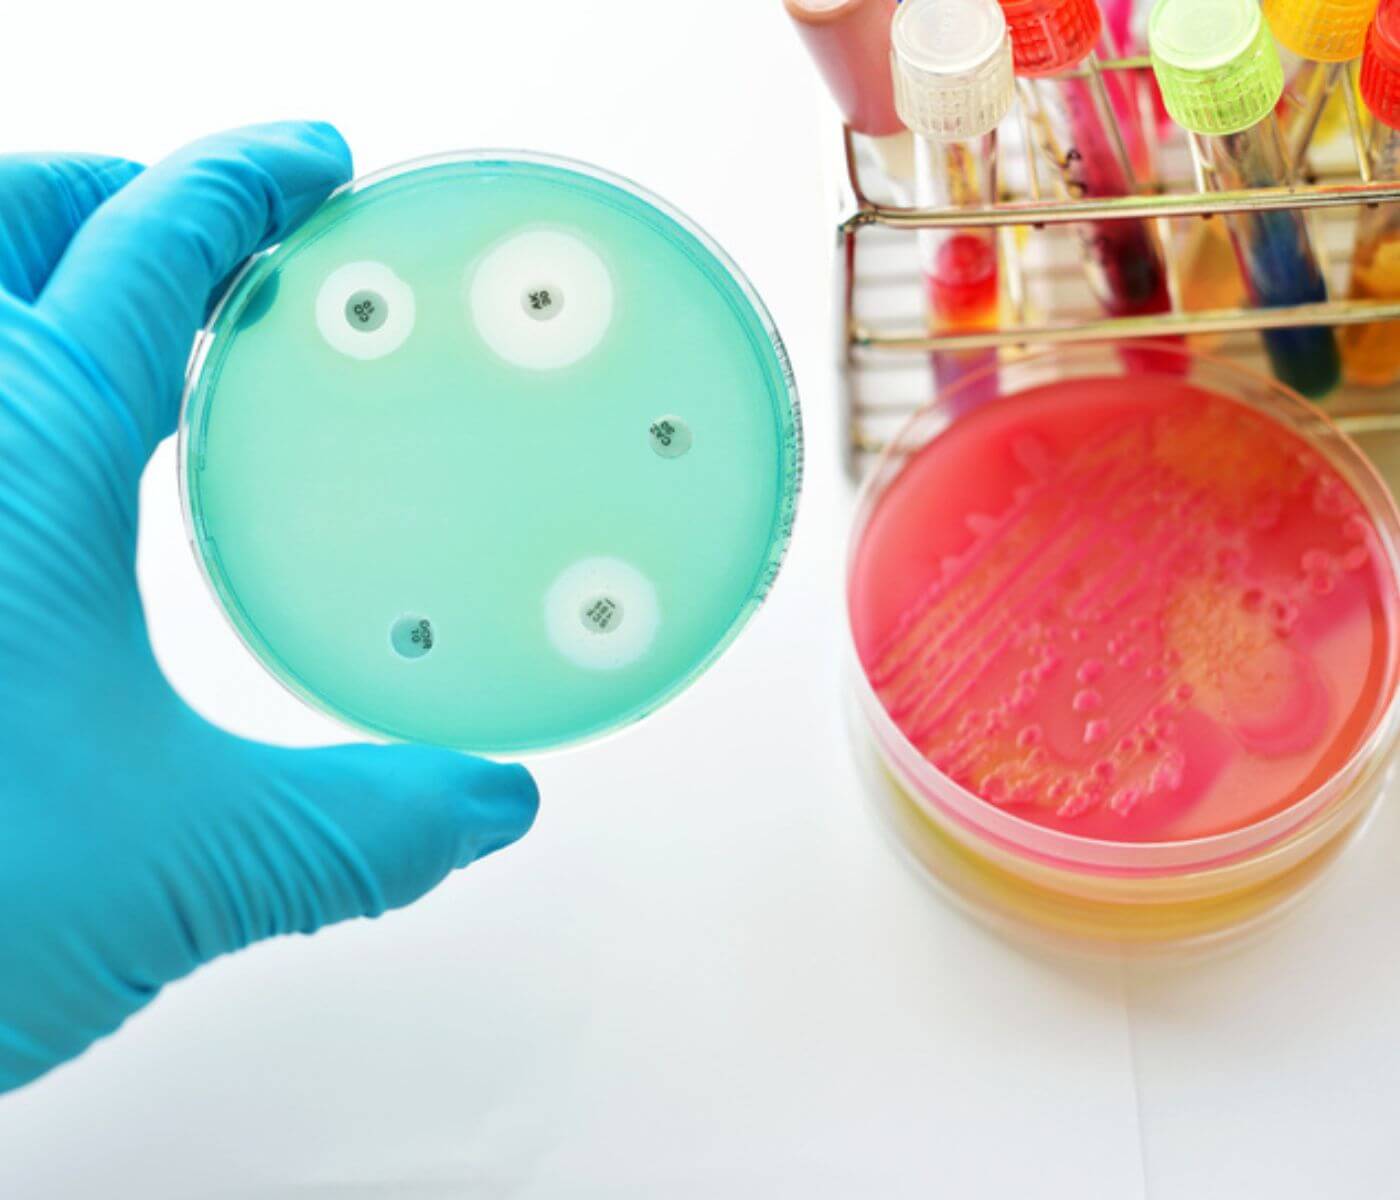 Bacteria resistant to highly used antibiotics still frequent in humans...